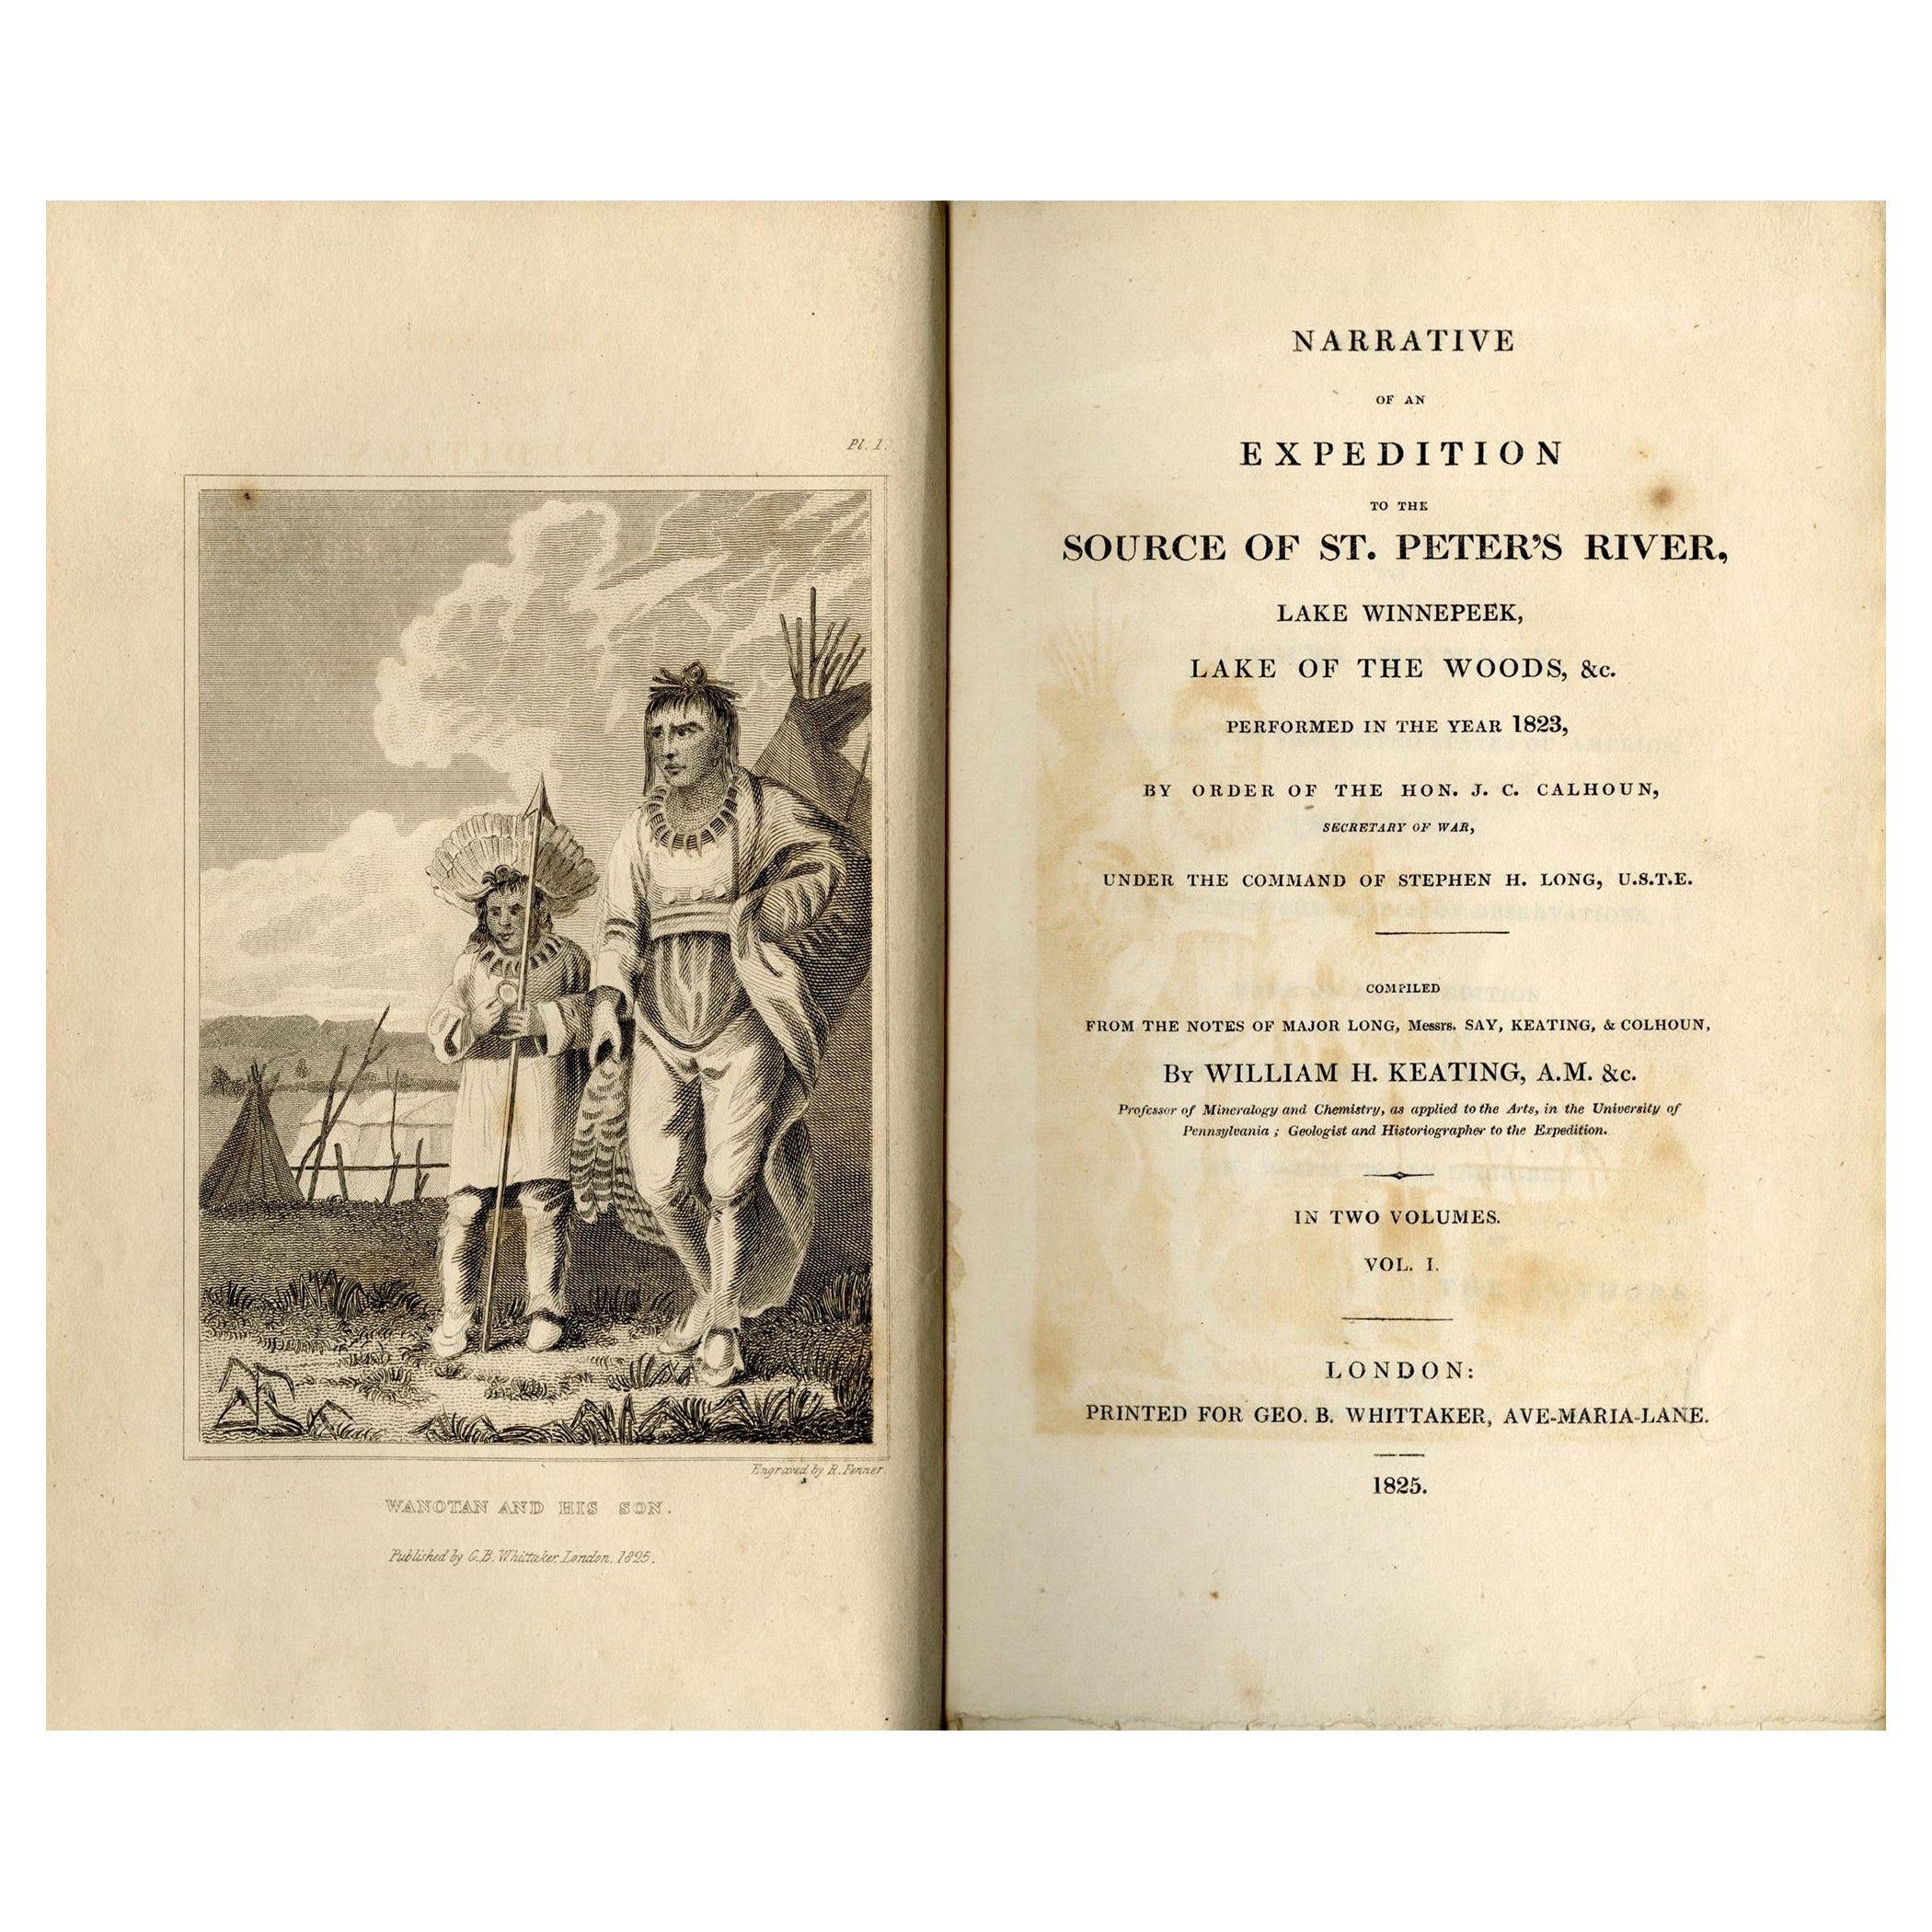 Keating, William. Narrative of an Expedition to the Source of St. Peter's River